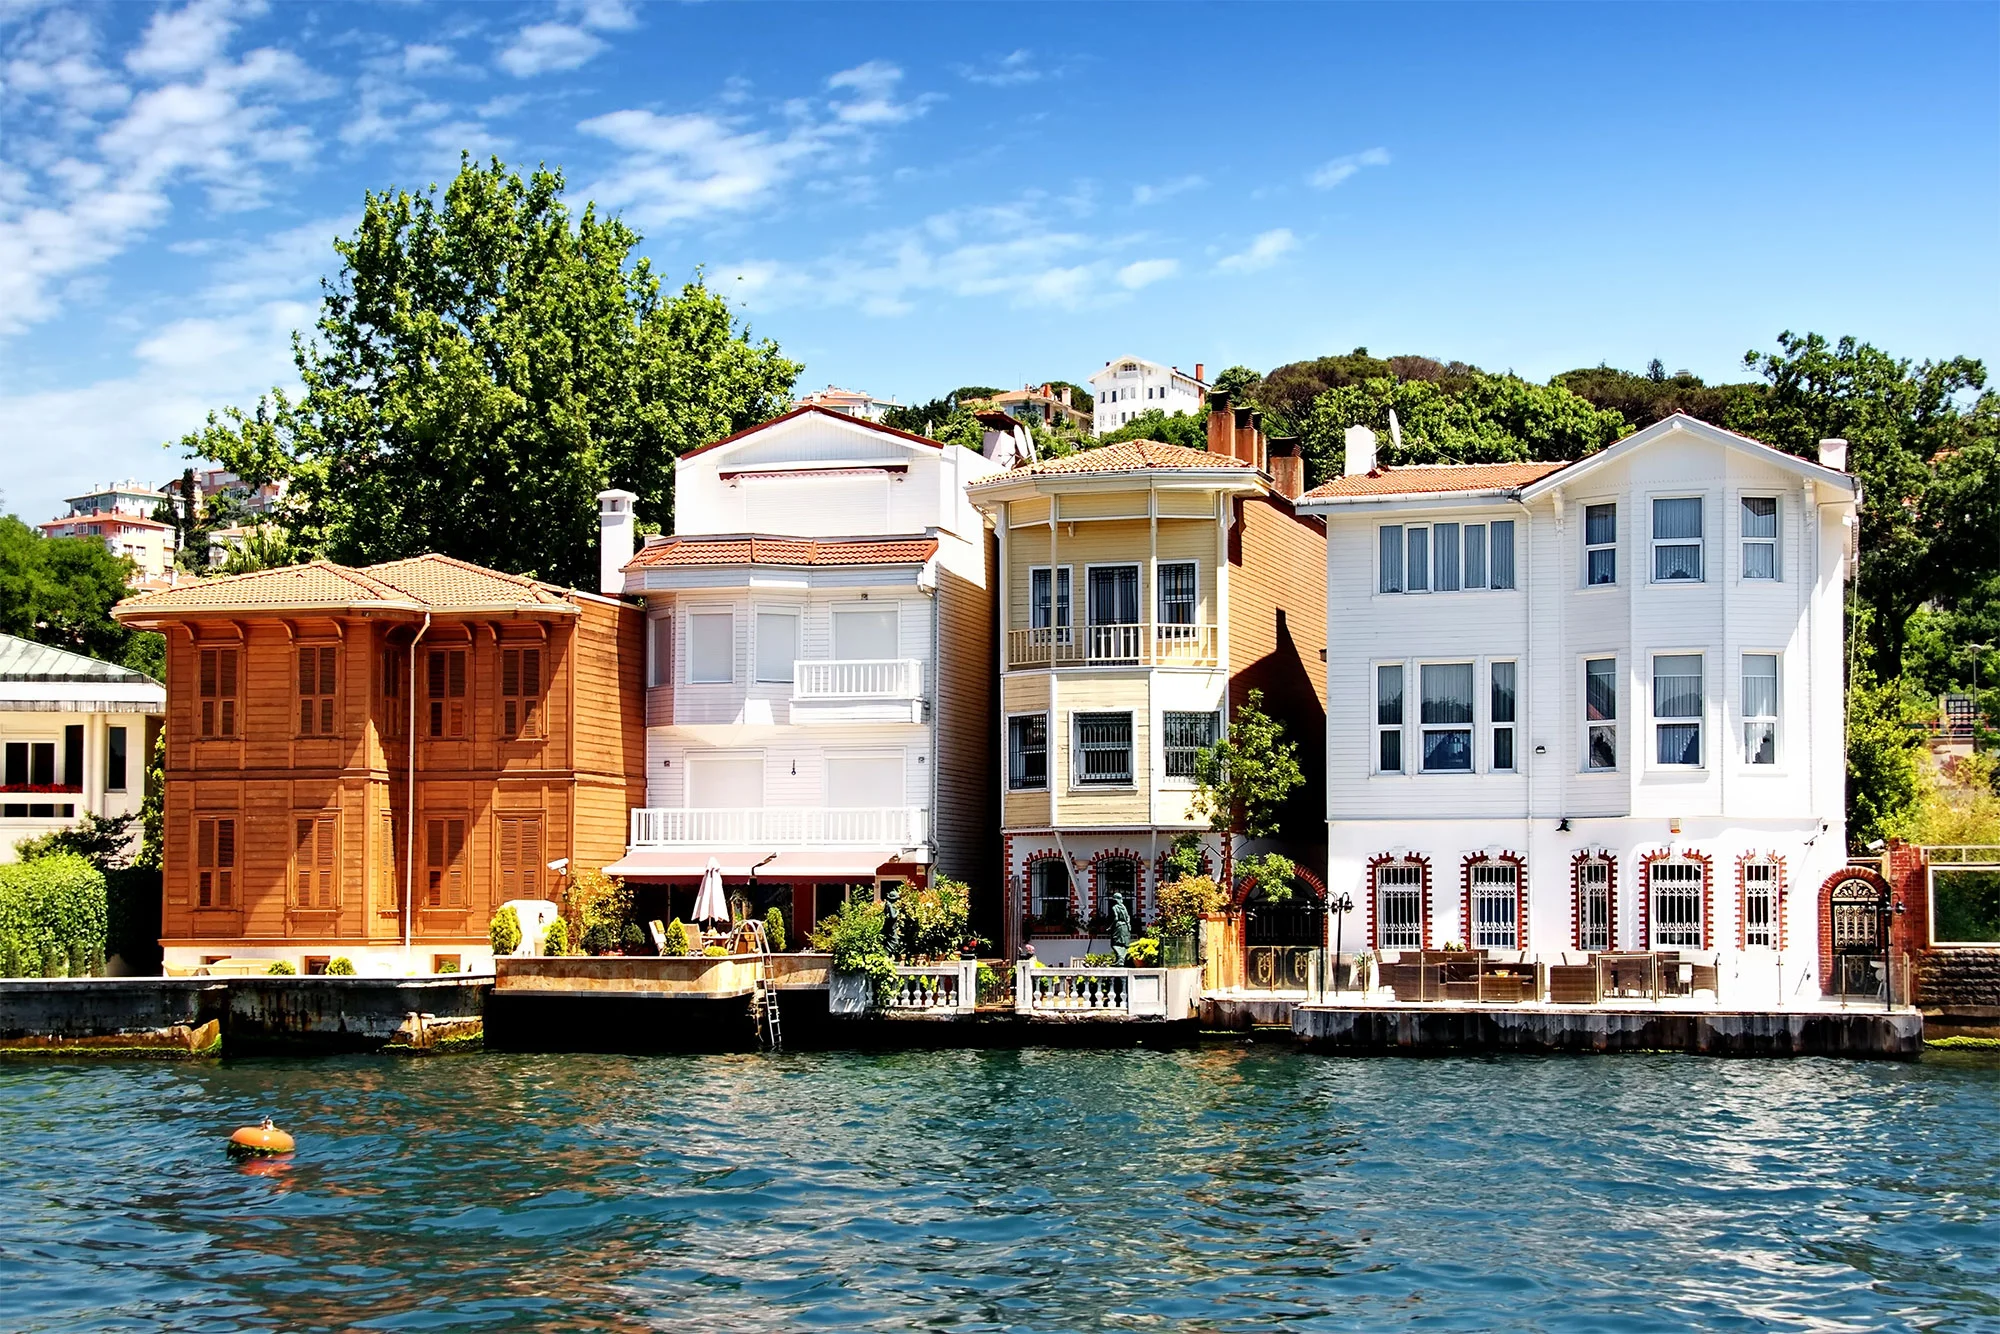 Why Should You Invest in Property In Turkey?